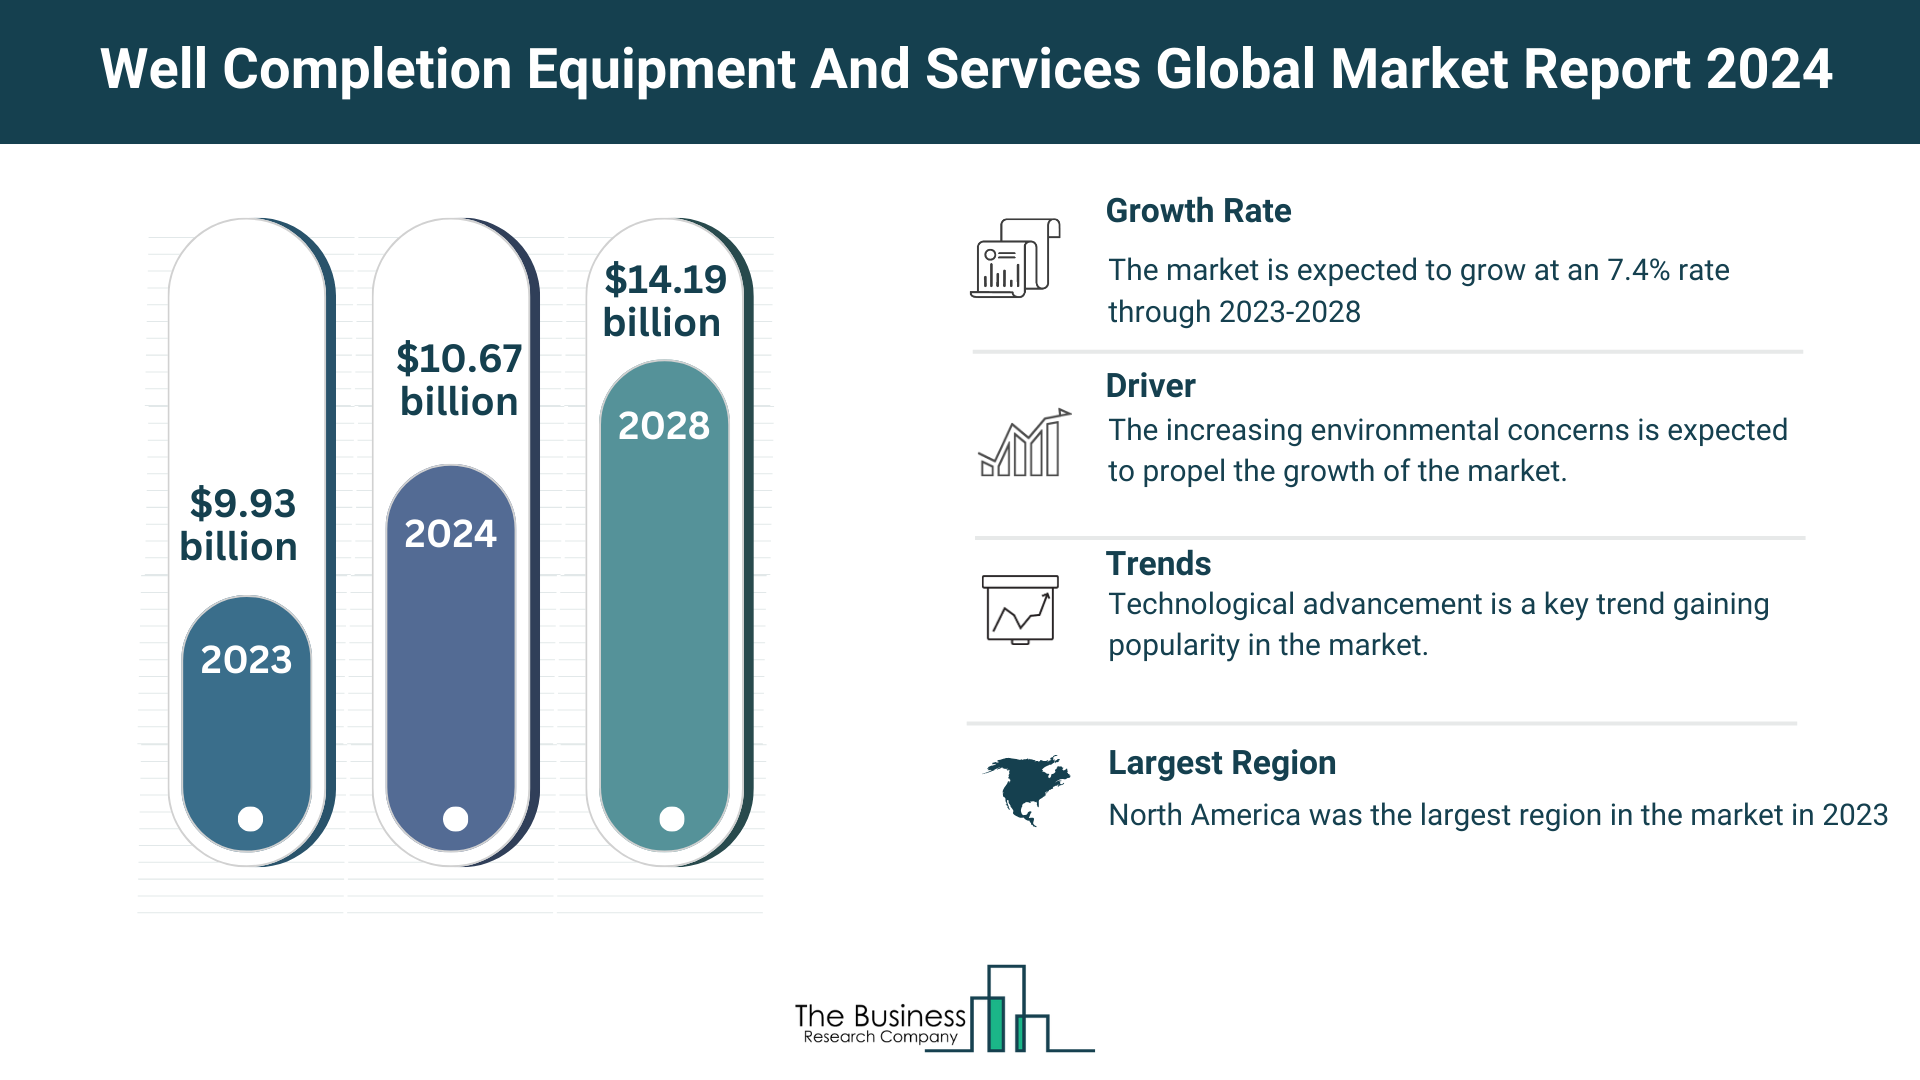 Well Completion Equipment And Services Market Overview: Market Size, Major Drivers And Trends